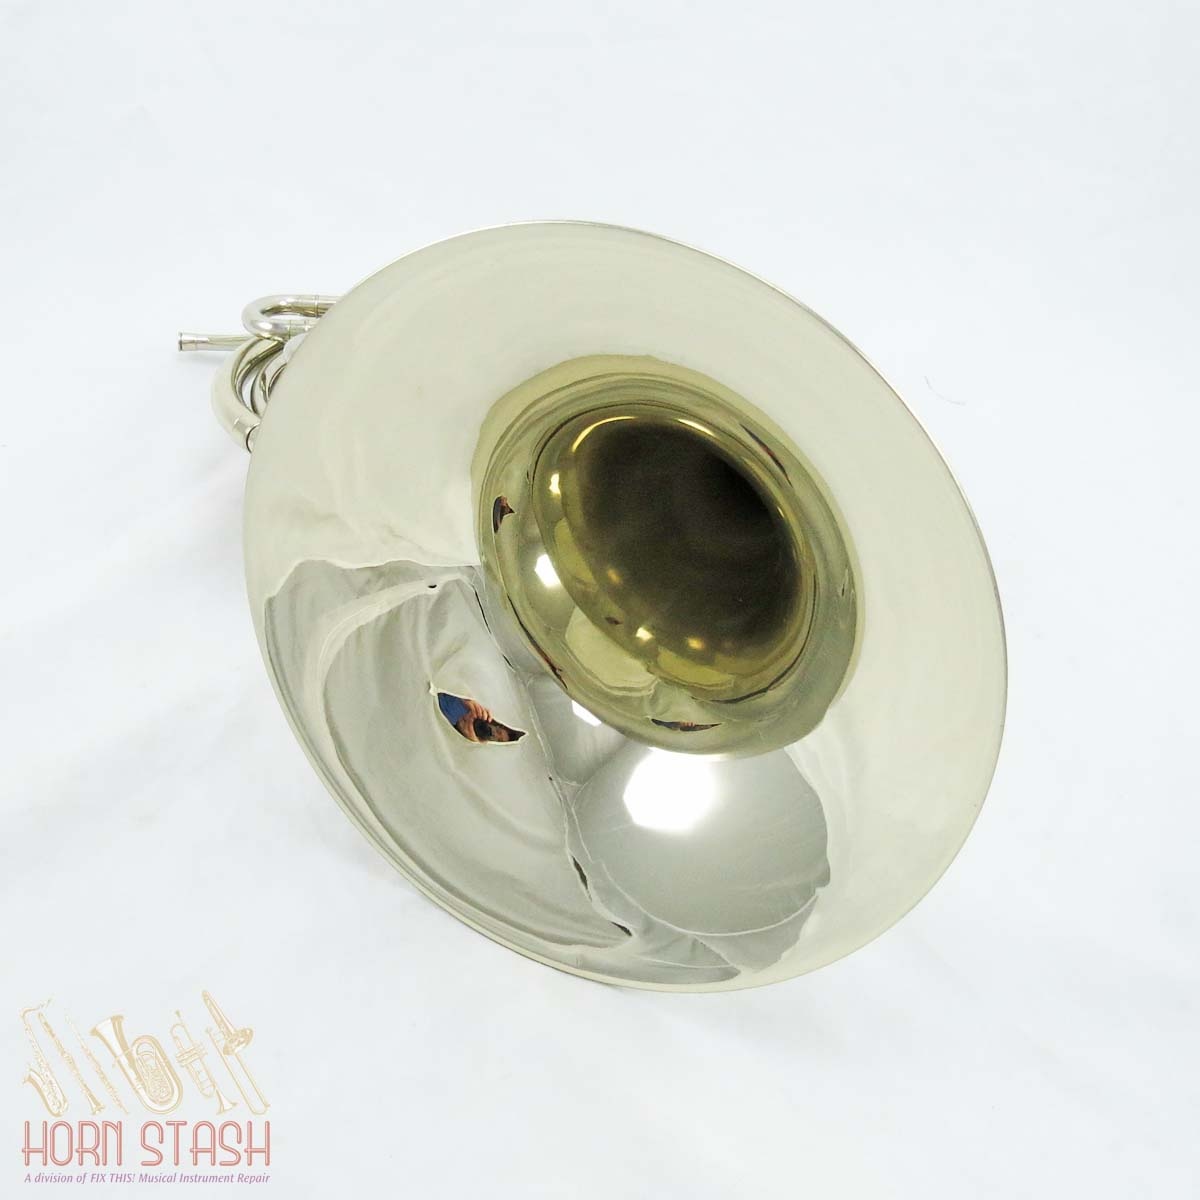 Holton Used Holton H175 "Merker-Matic" Double Horn - 6788XX